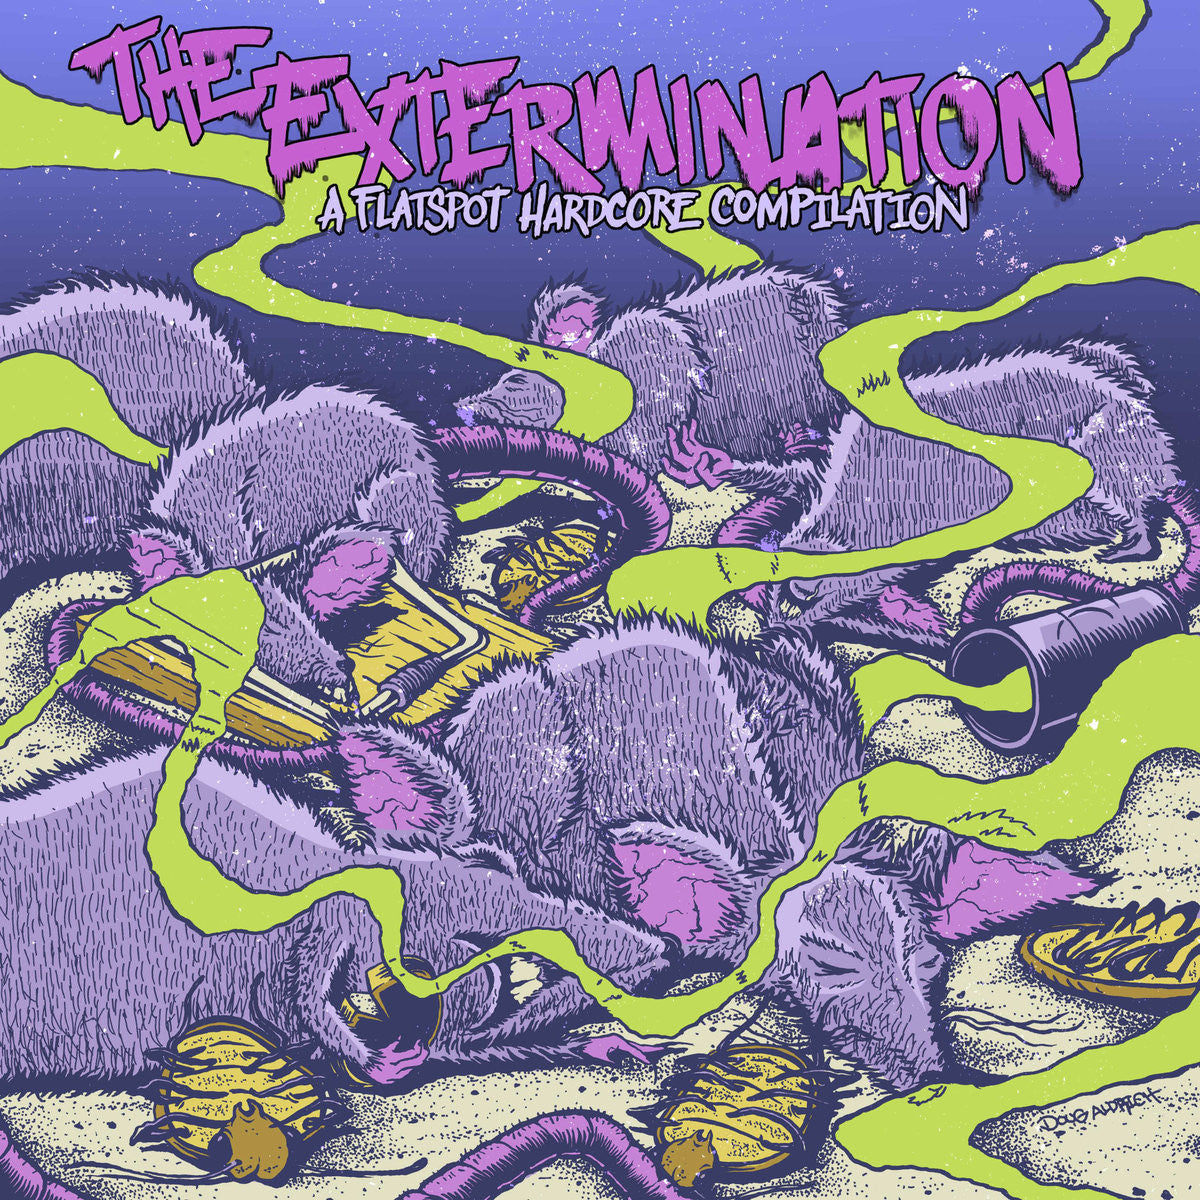 Buy – Various Artists "Extermination" 7" – Band & Music Merch – Cold Cuts Merch